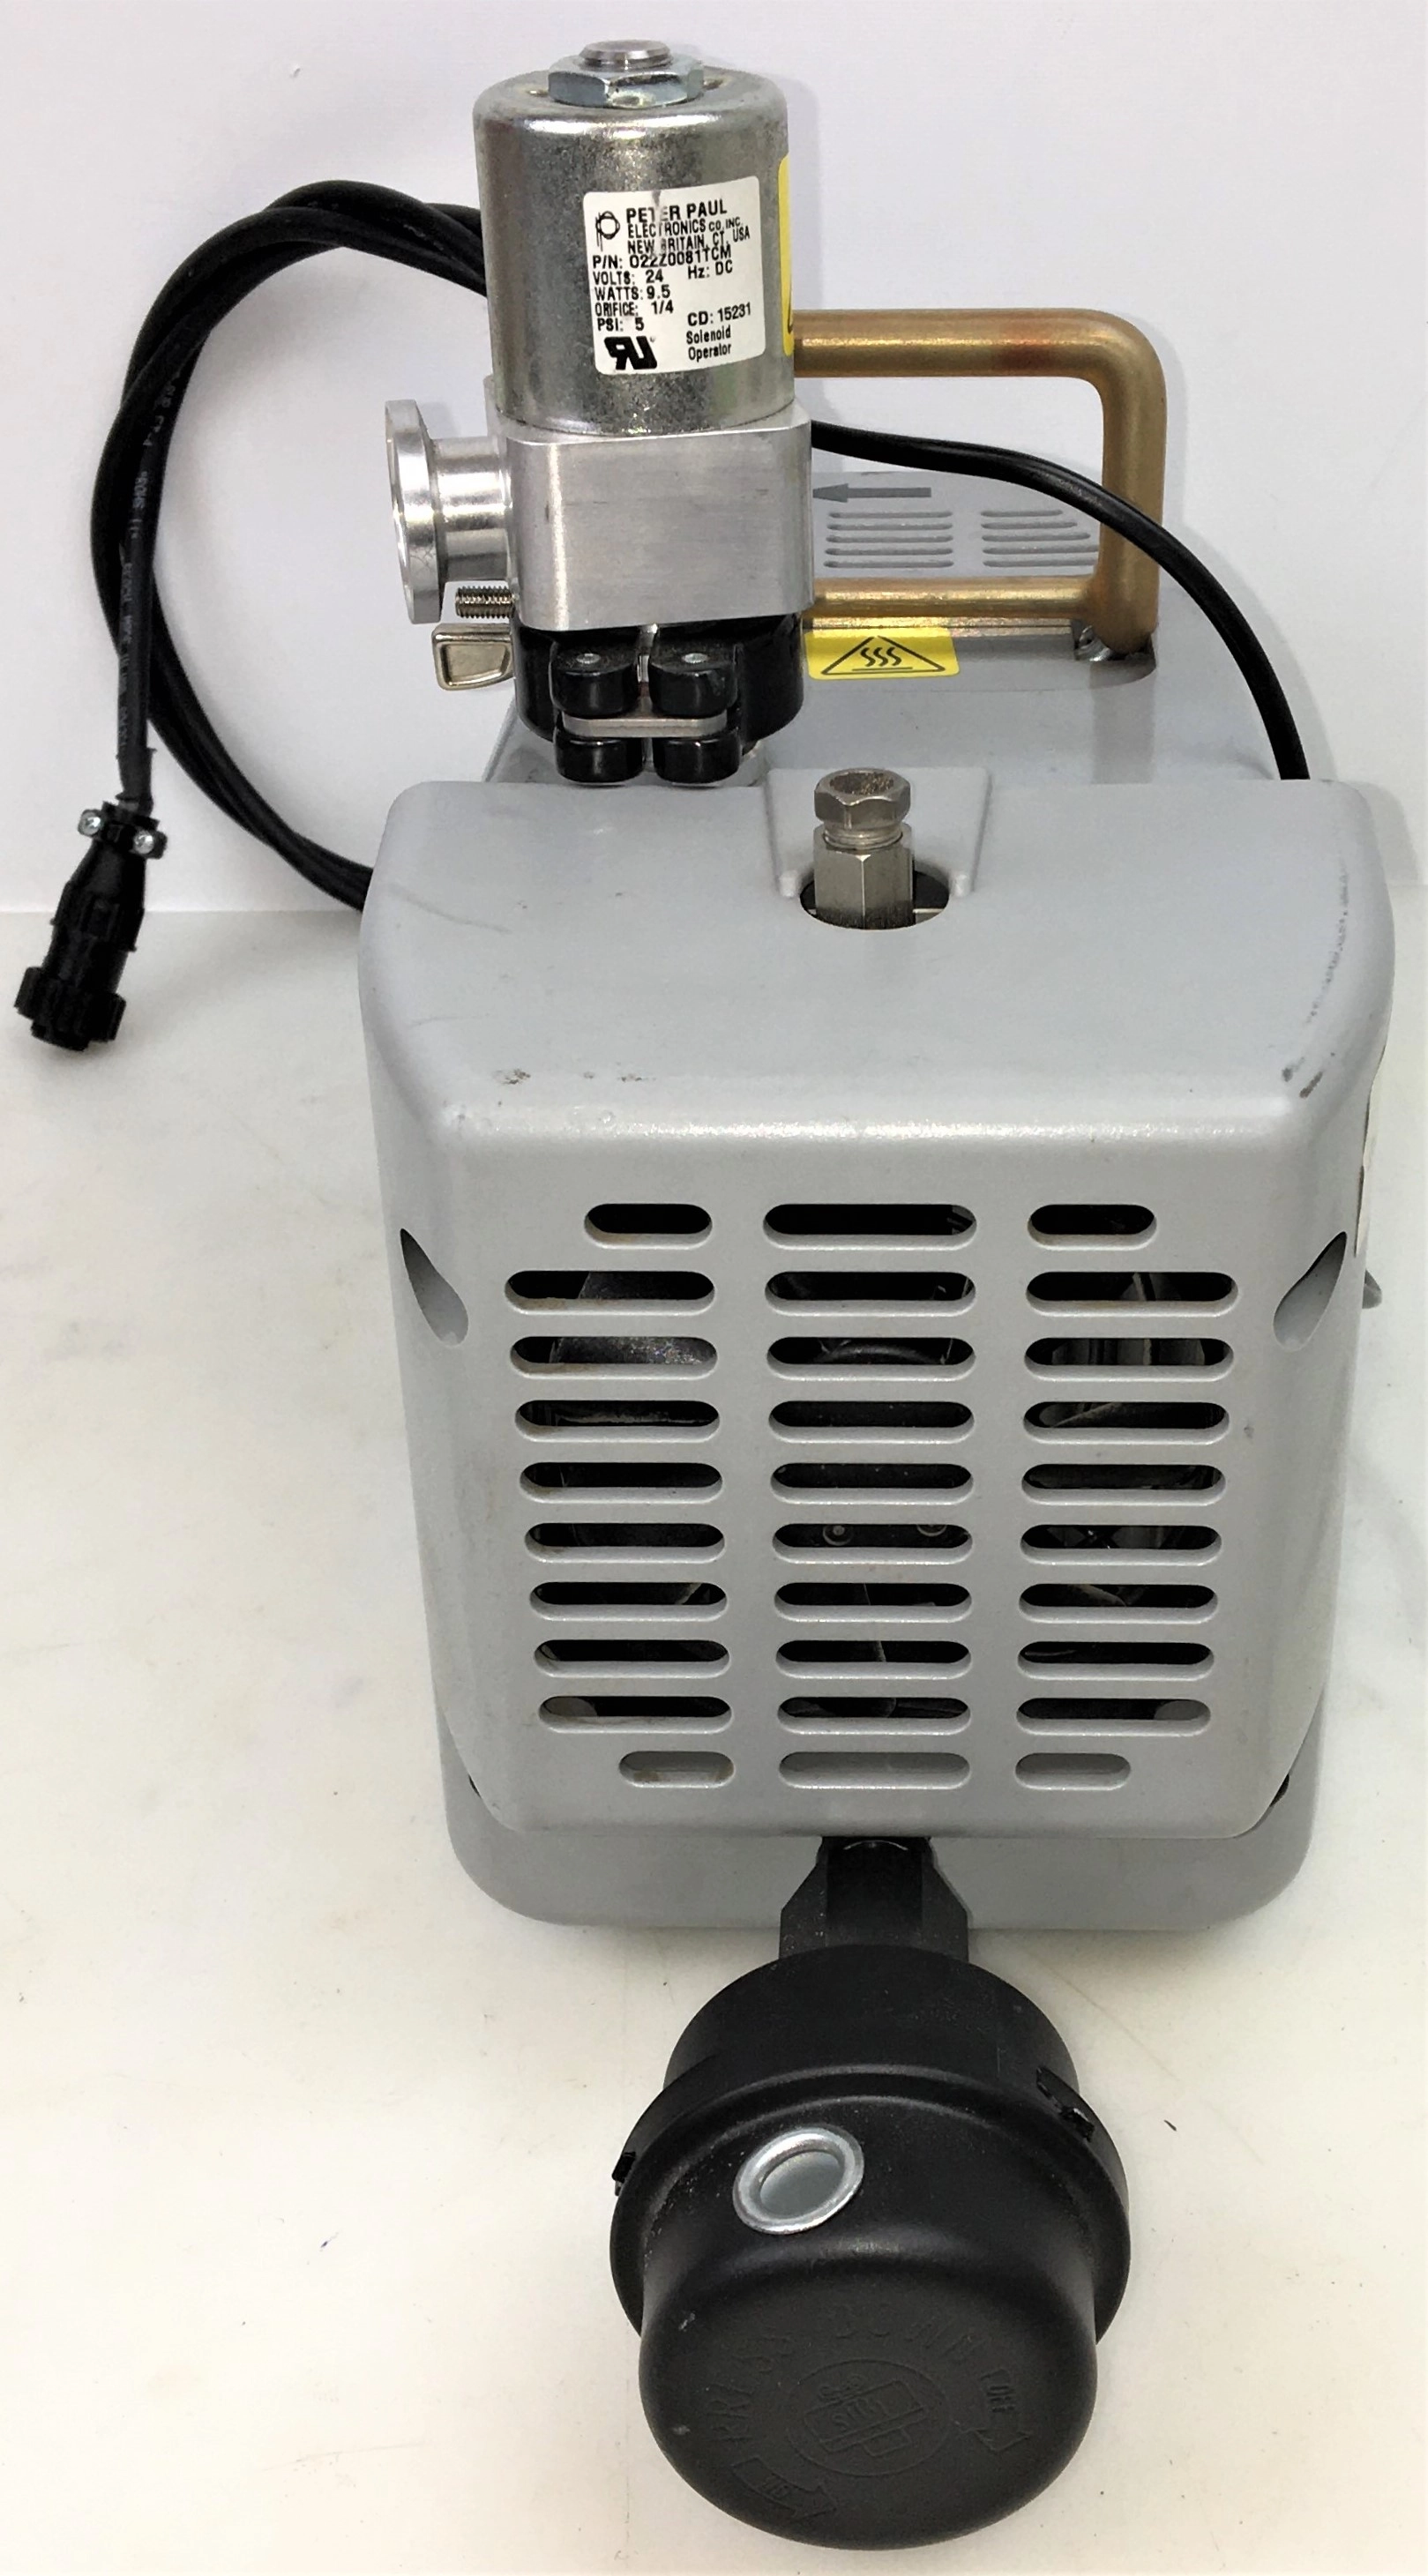 Agilent IDP-3 Dry Scroll Vacuum Pump with Intake Valve and Power